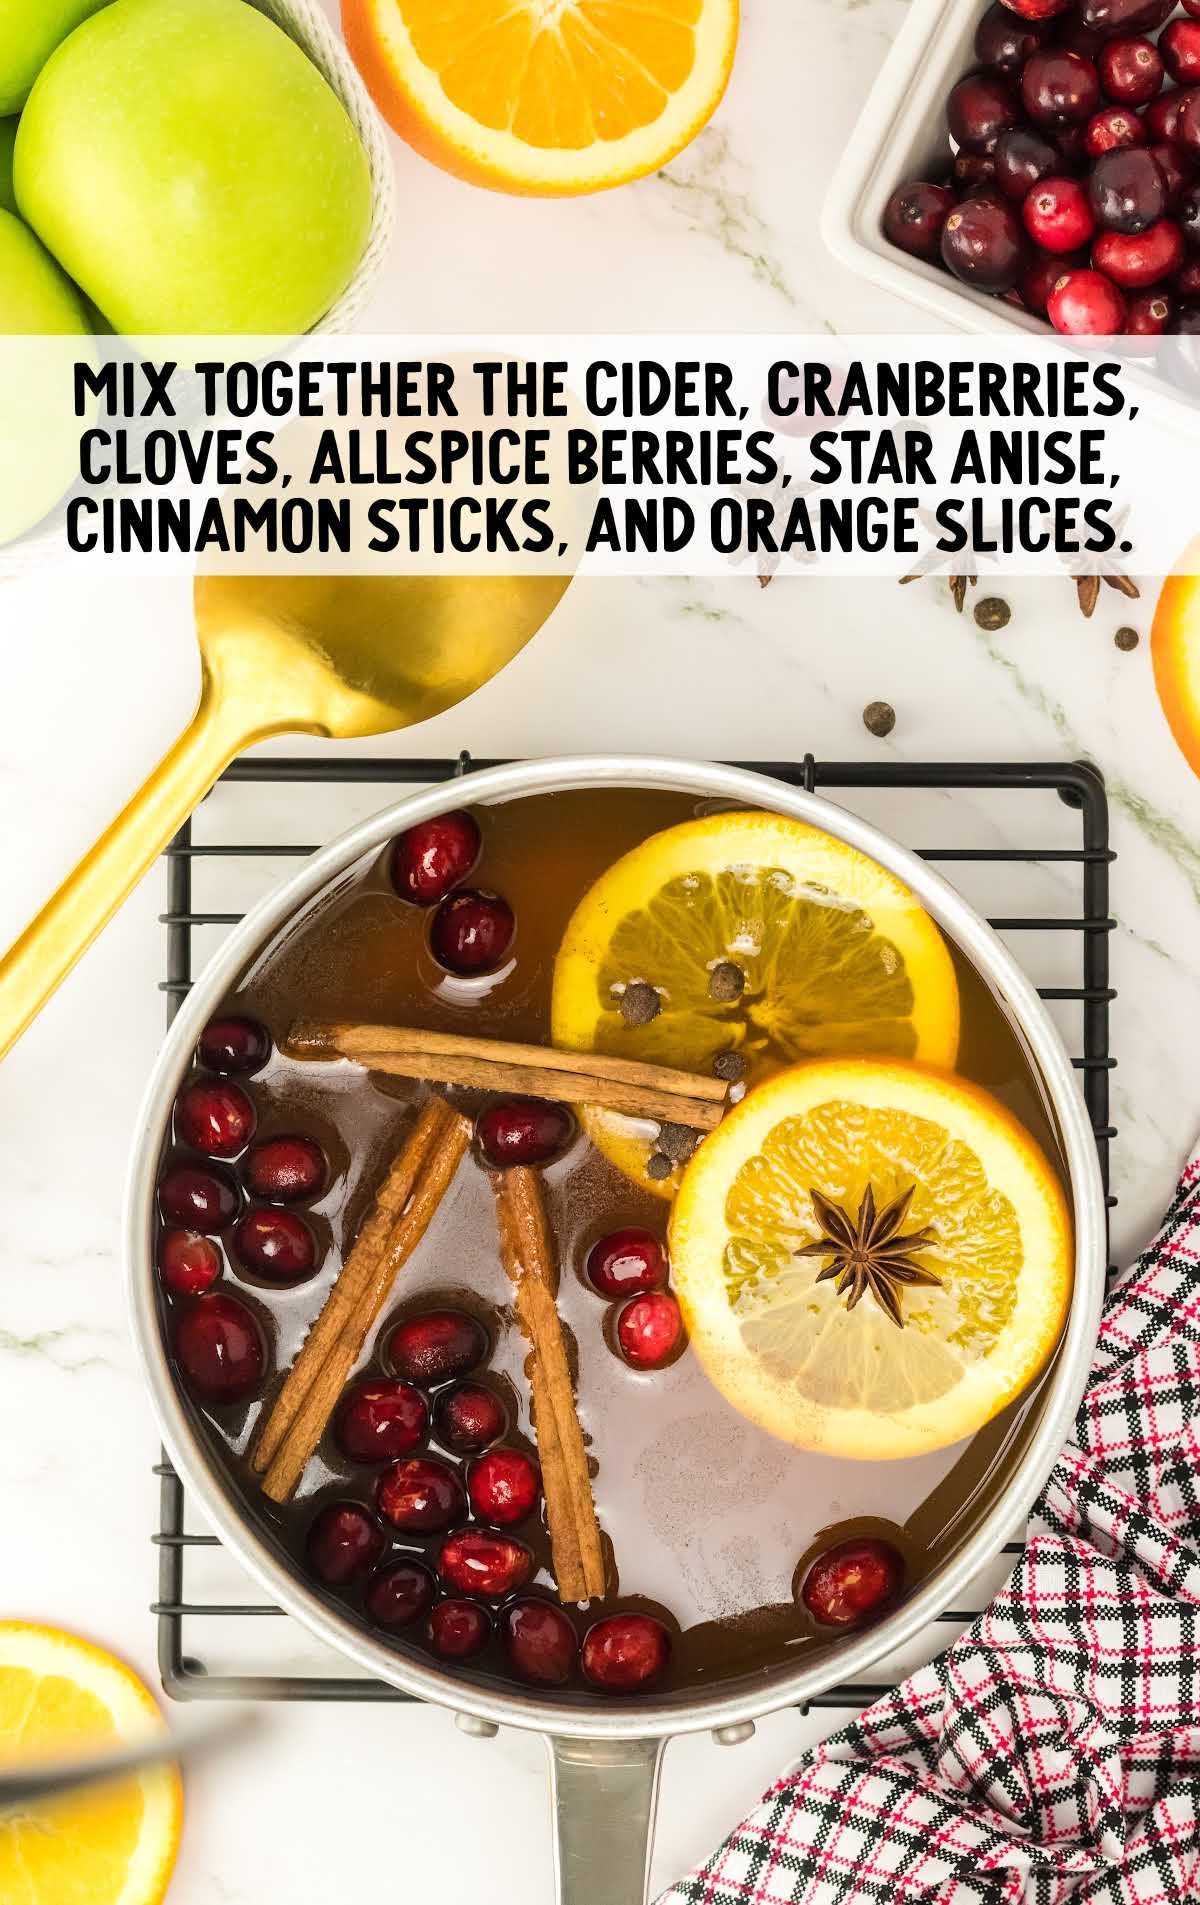 cider, cranberries, cloves, allspice berries, star anise, cinnamon stick, and orange slices mixed together